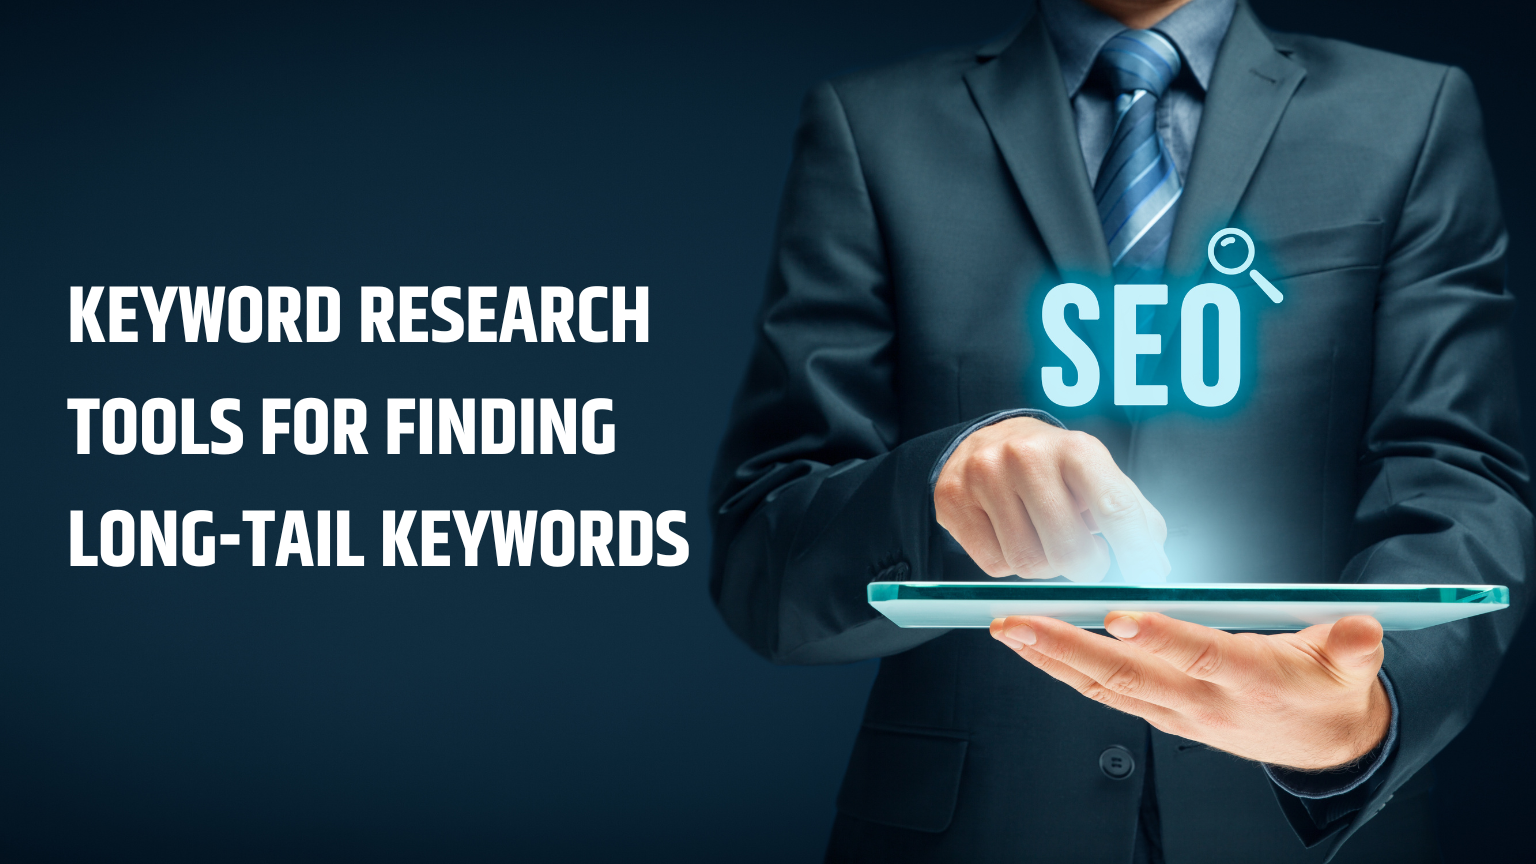 Keyword Research Tools for Finding Long-Tail Keywords